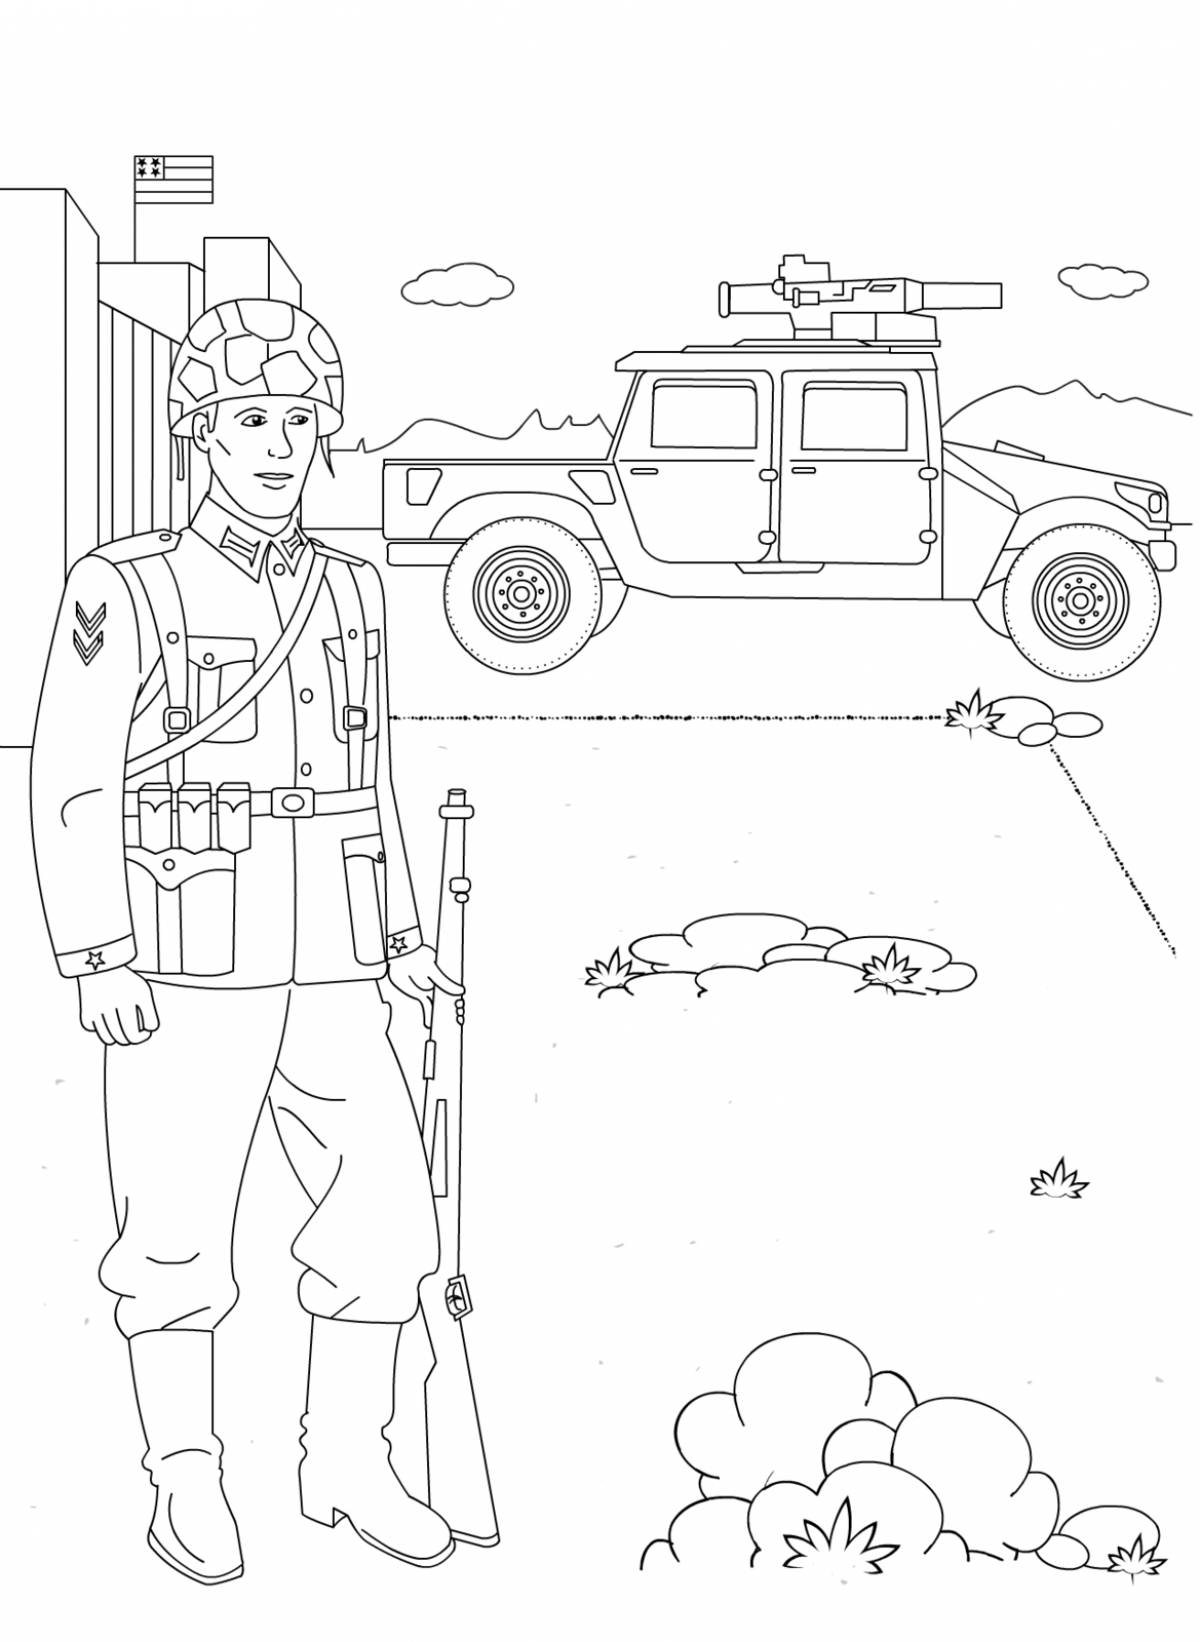 Coloring page heroic soldiers of the russian army